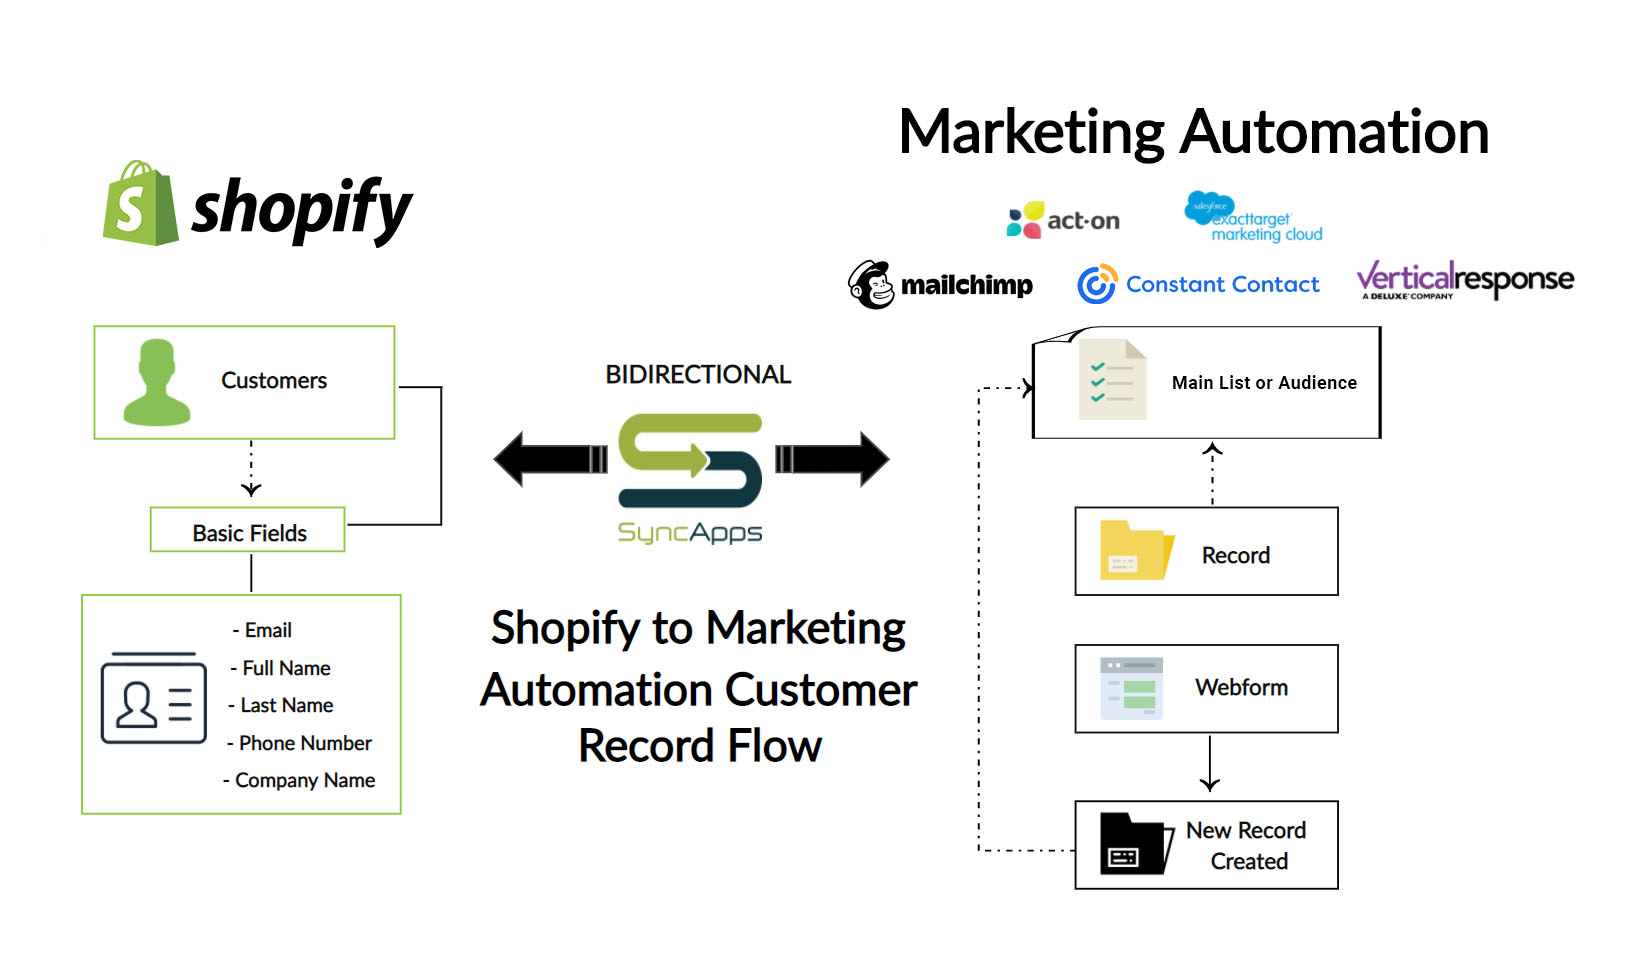 Shopify for Marketing Automation